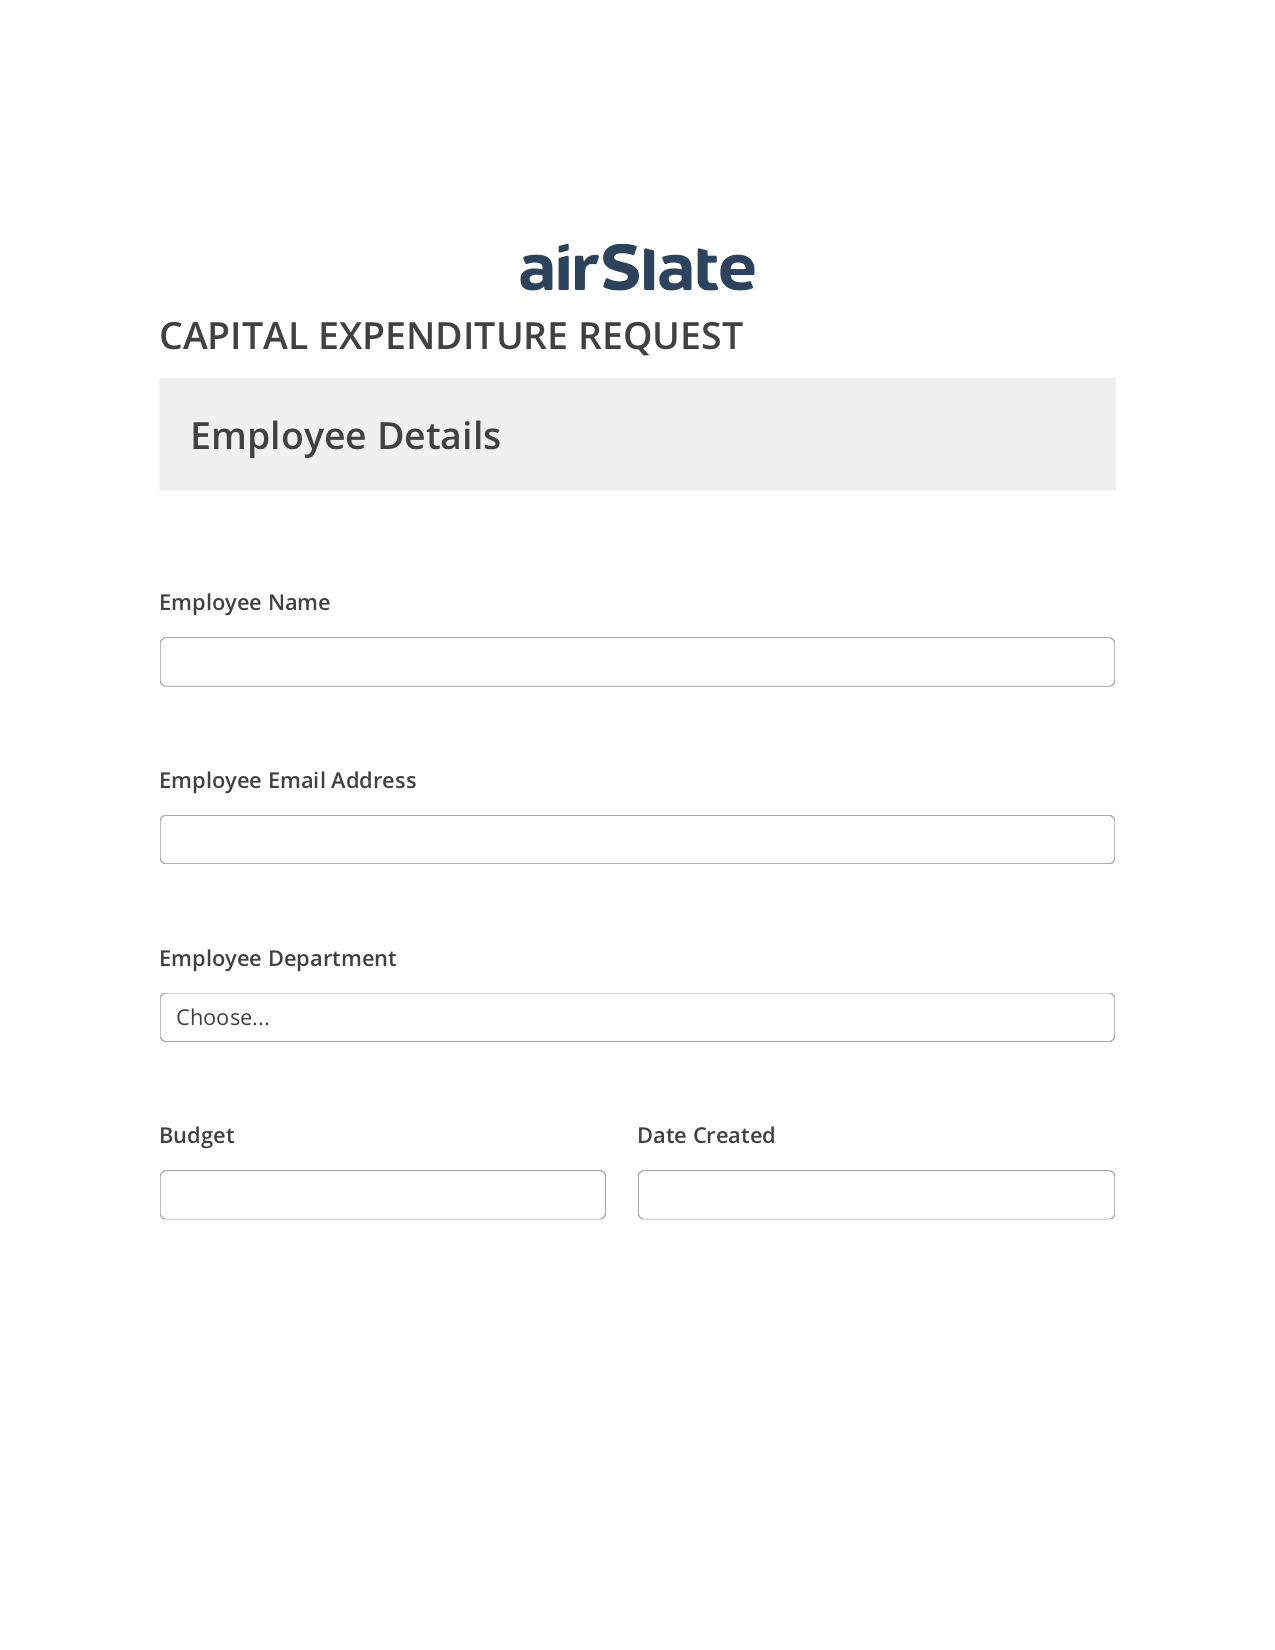 Multirole Capital Expenditure Request Approval Workflow Pre-fill Slate from MS Dynamics 365 record, Create Slate every Google Sheet Update Bot, Webhook Postfinish Bot